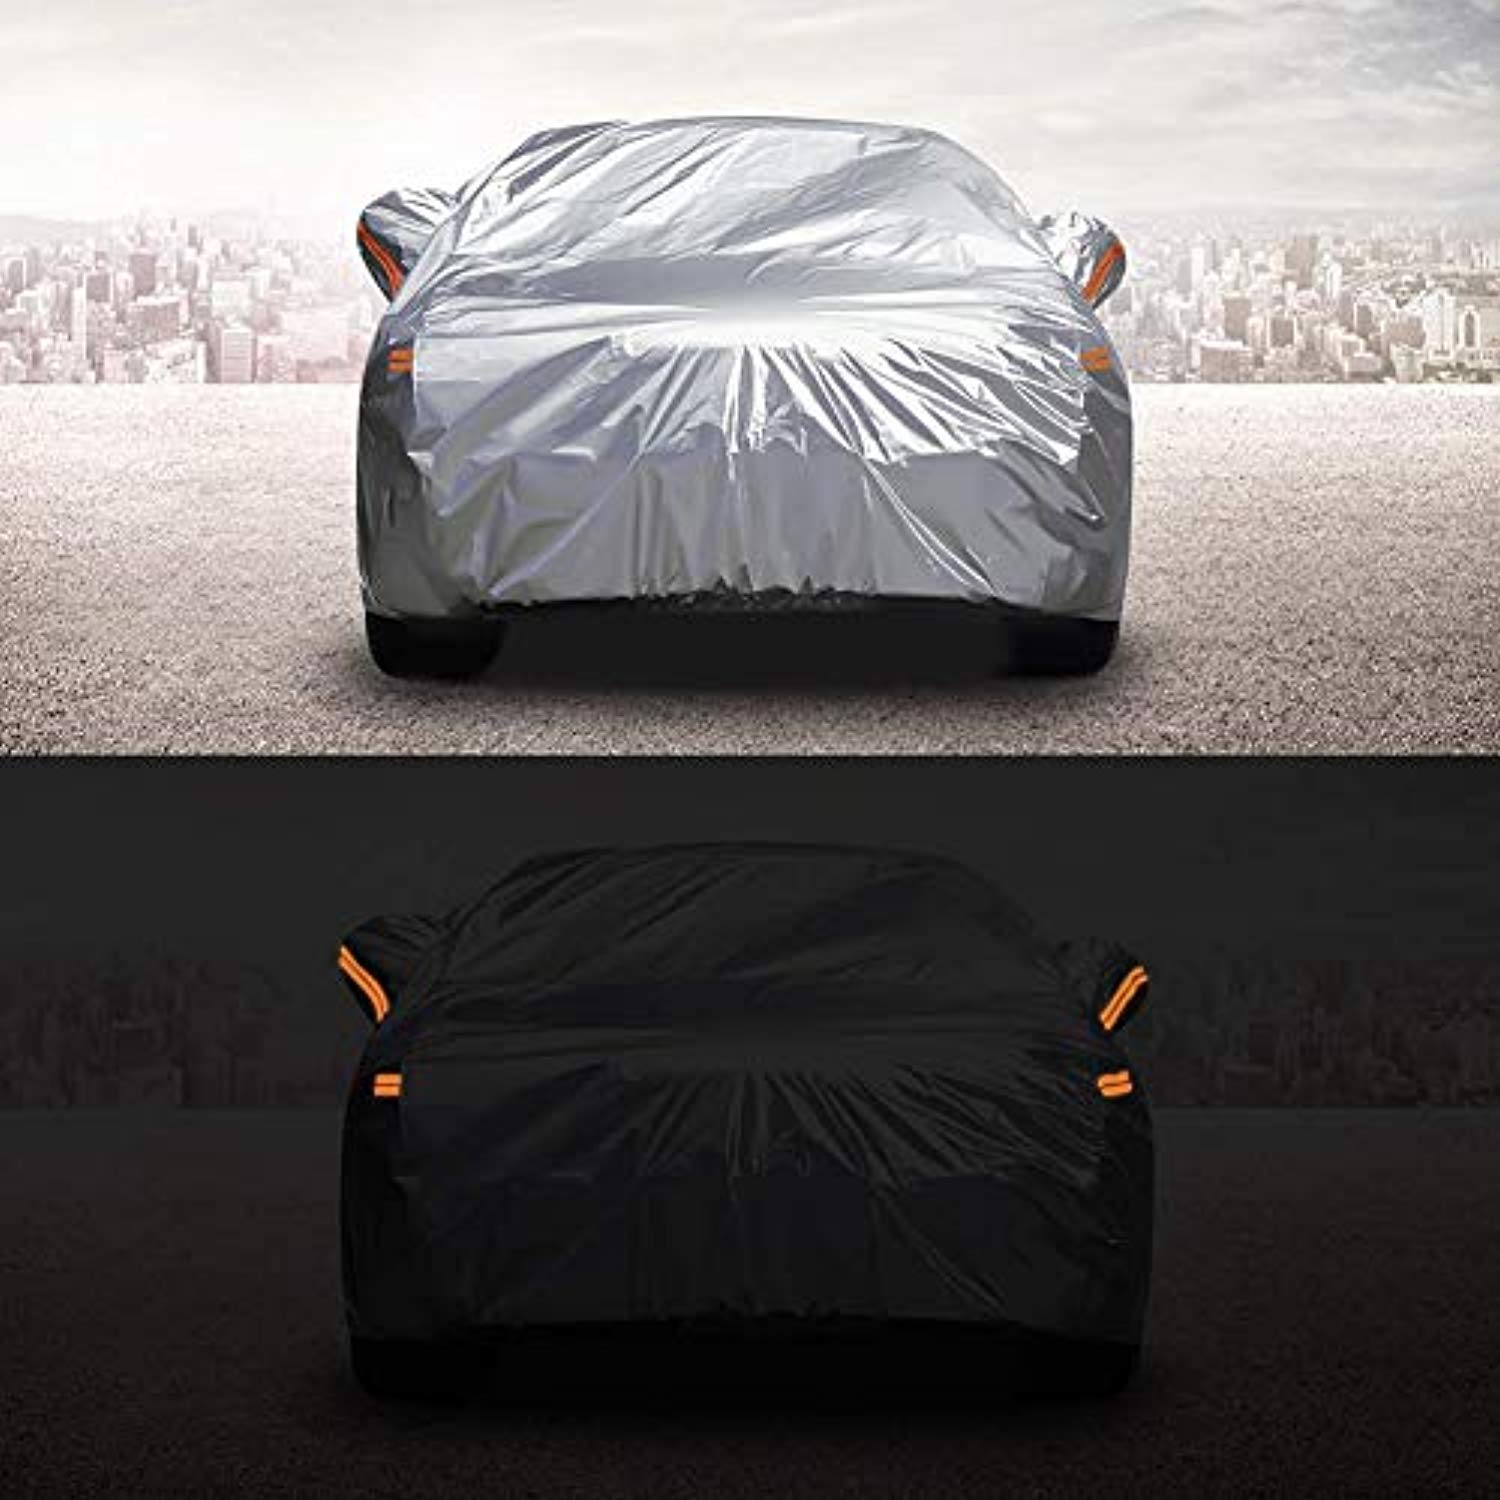 Big Ant Car Cover,6 Layers Waterproof Car Cover for Jeep Wrangler 4  Doors,Outdoor Half Car Cover Protect from Snow Rain Fit for 1987-2022  Wrangler CJ,YJ, TJ & JK 